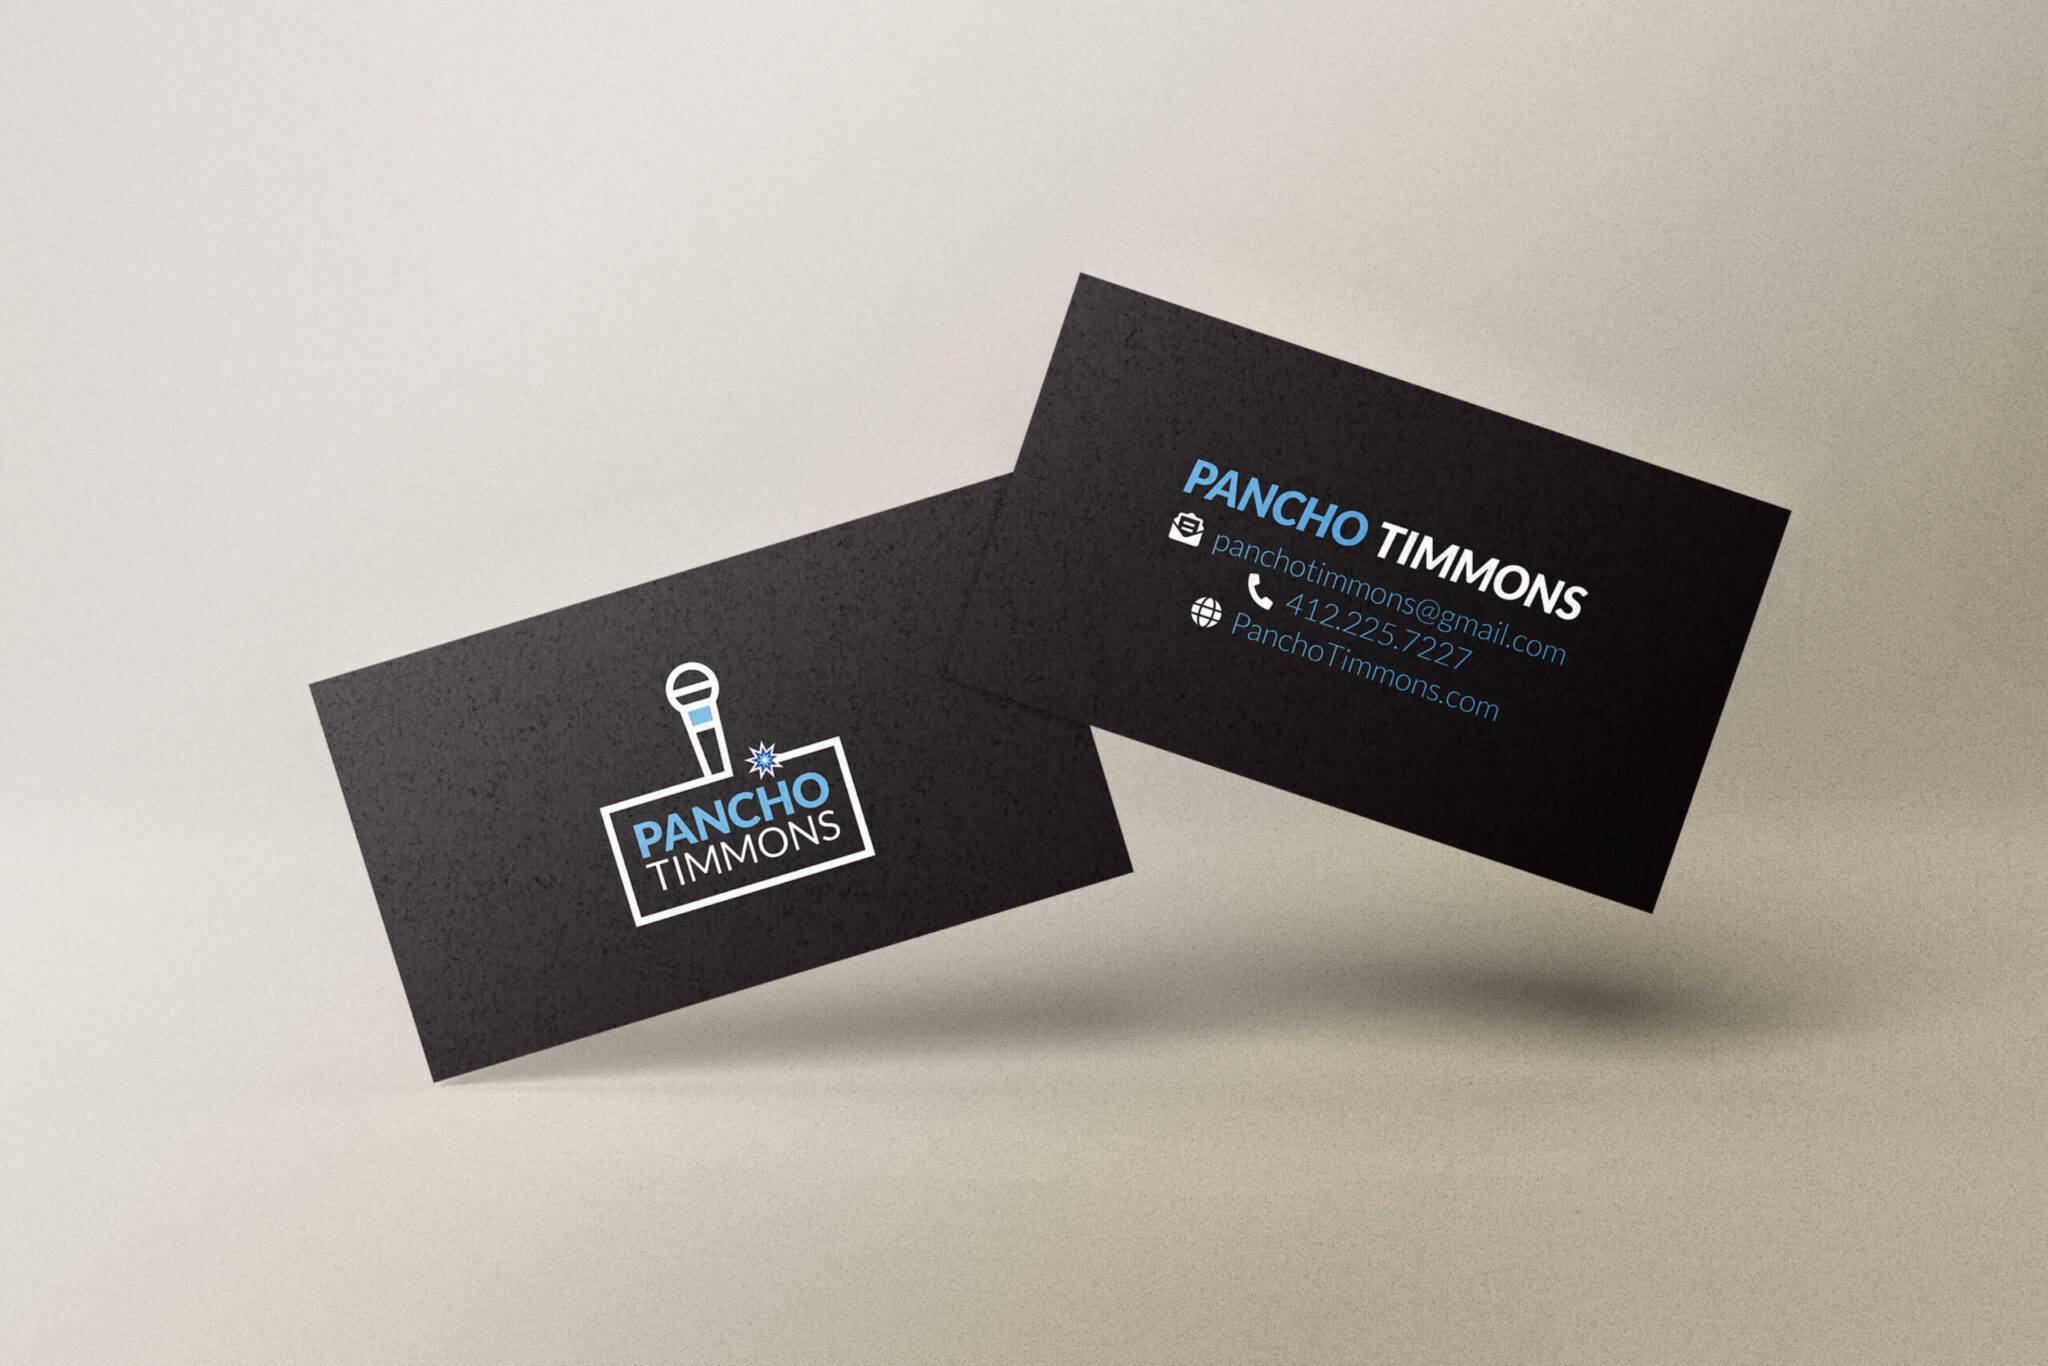 Pancho Timmons Business Cards